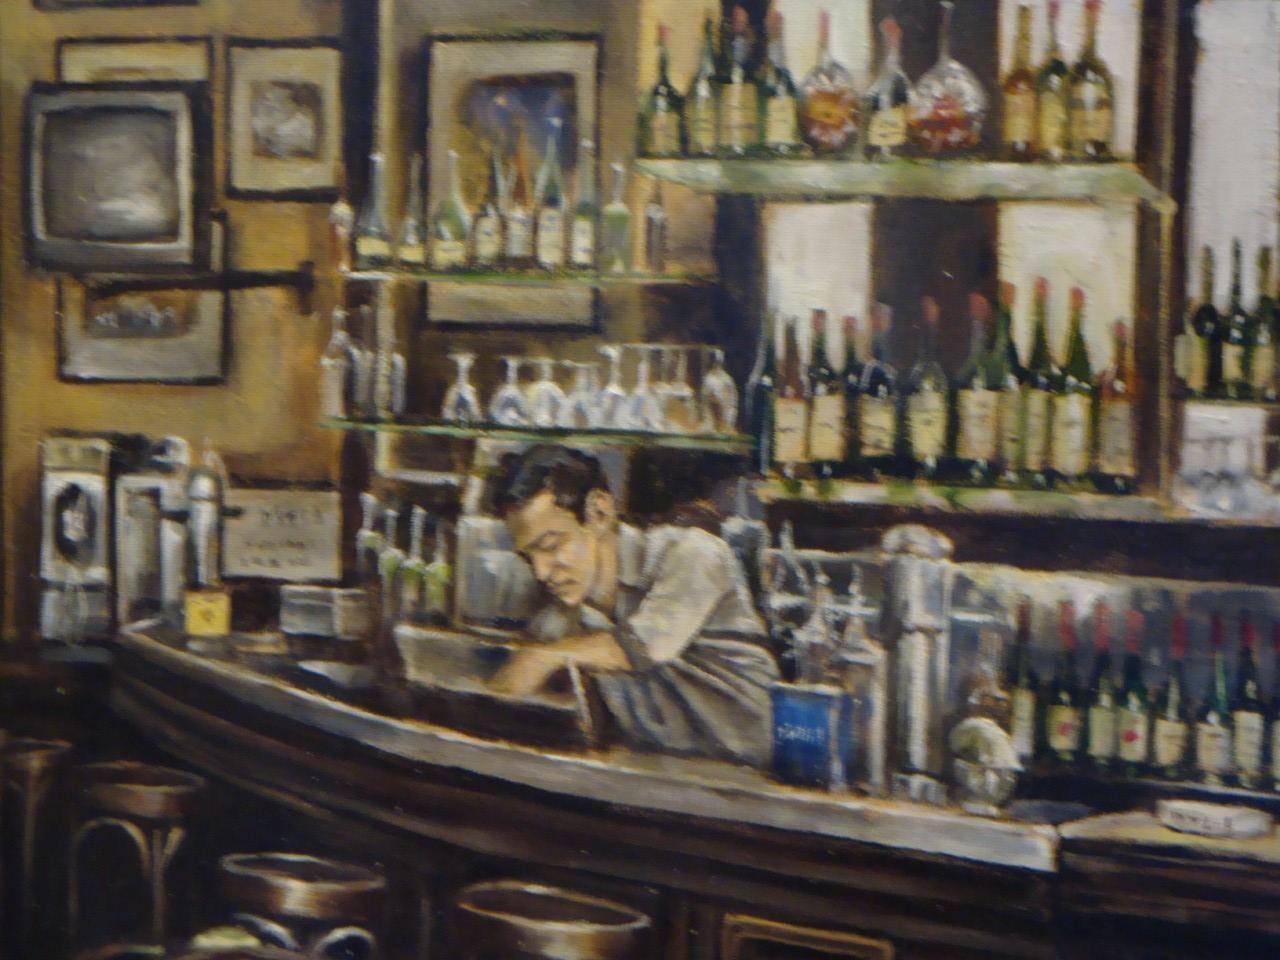 A magnificent rare original oil on canvas painting. Signed by artist Harry McCormick. Painting features the famed NYC restaurant bar titled 